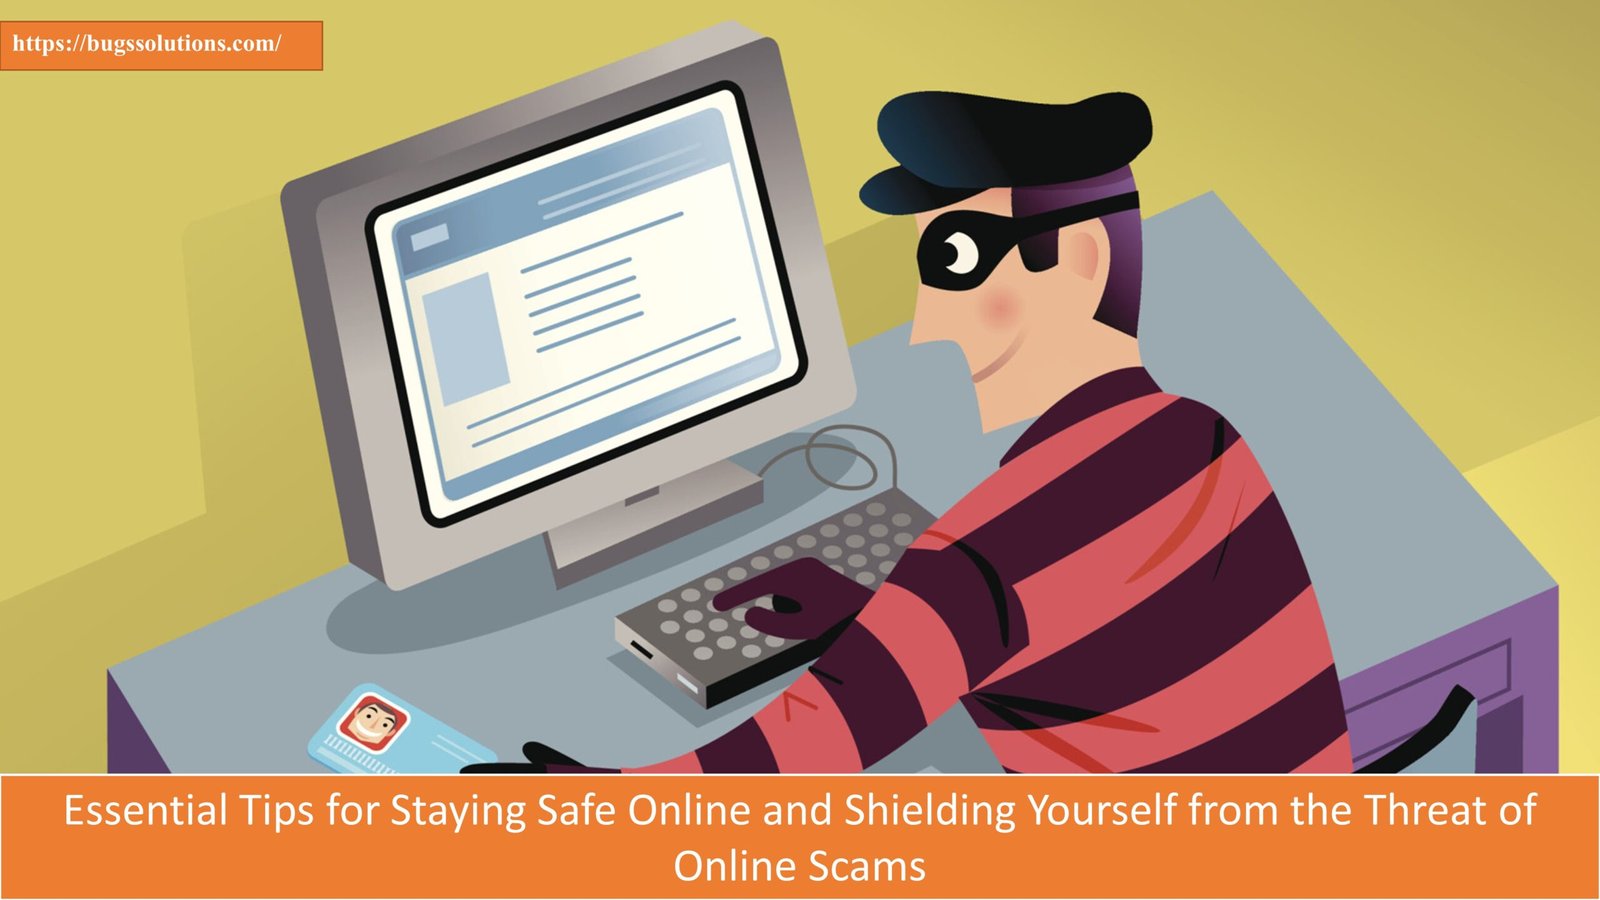 Essential Tips for Staying Safe Online and Shielding Yourself from the Threat of Online Scams